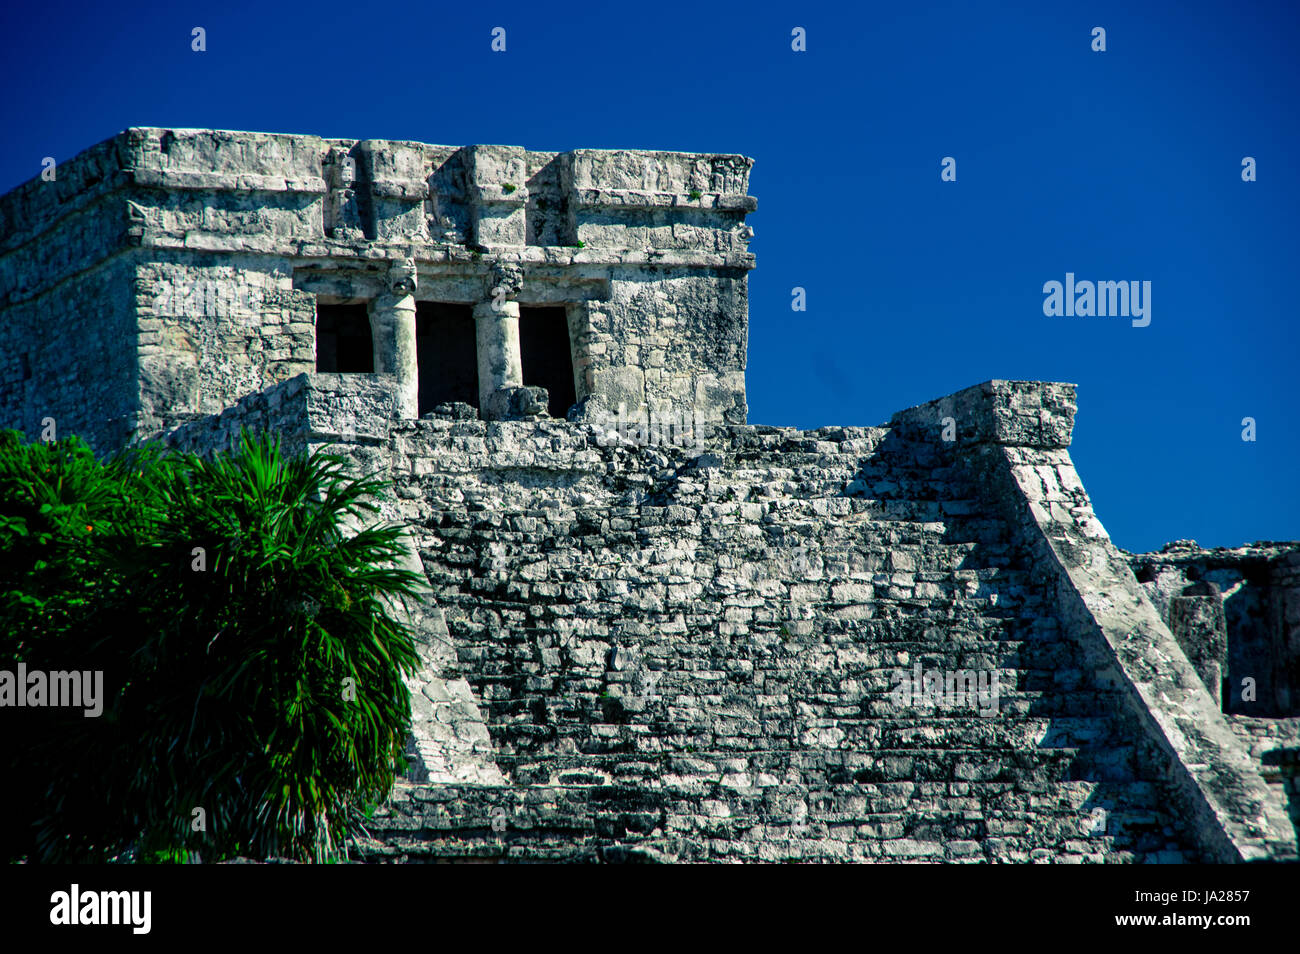 The Mayan ruins of Tulum on the Yucatán peninsula in the state of Quintana Roo, Mexico Stock Photo